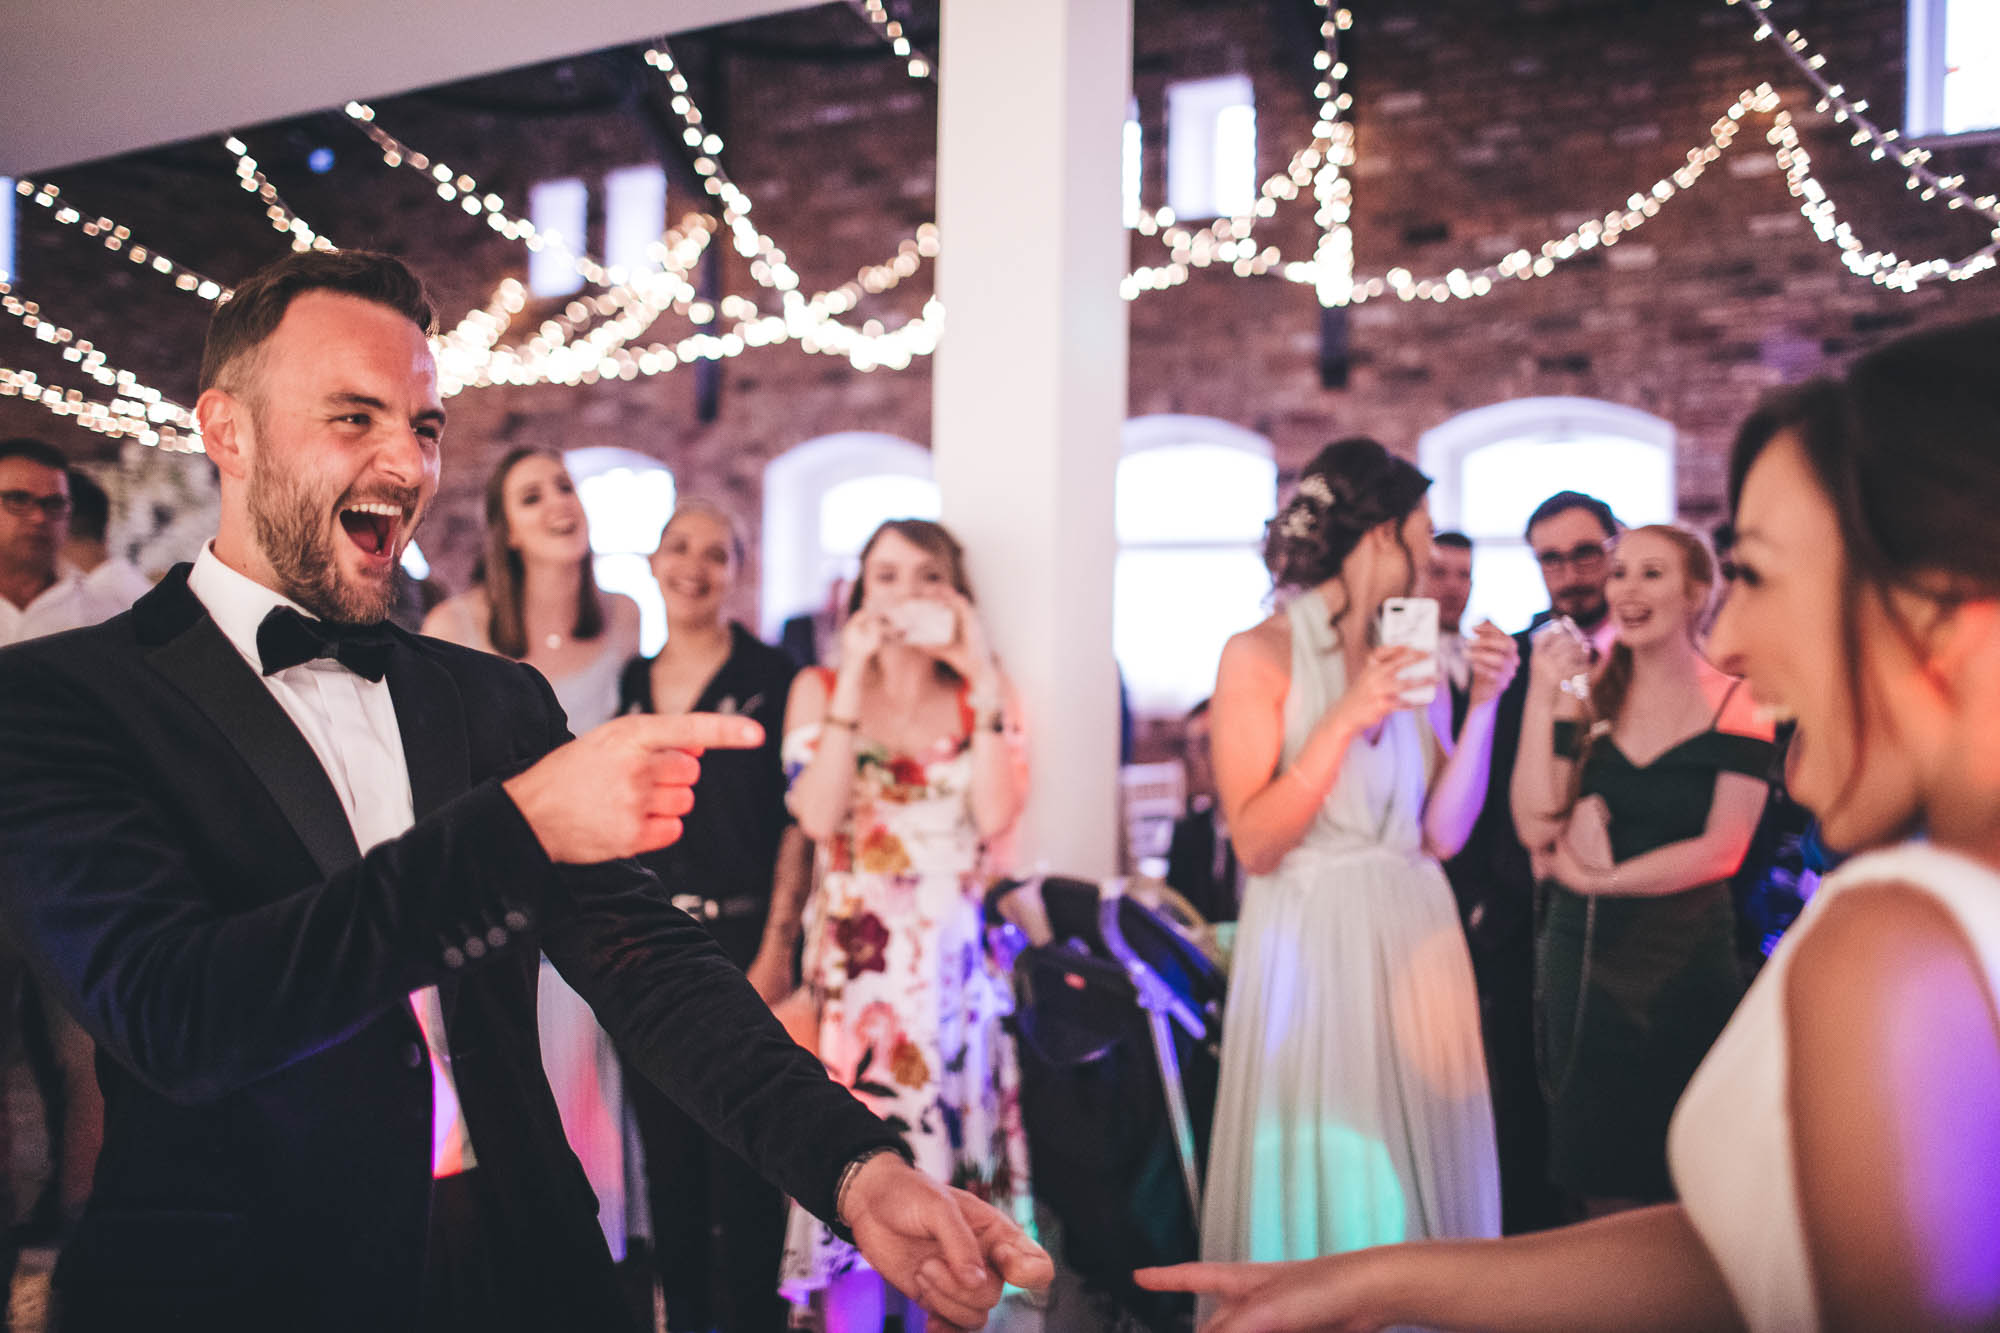 Bride and Groom have fun with each other on the dancefloor